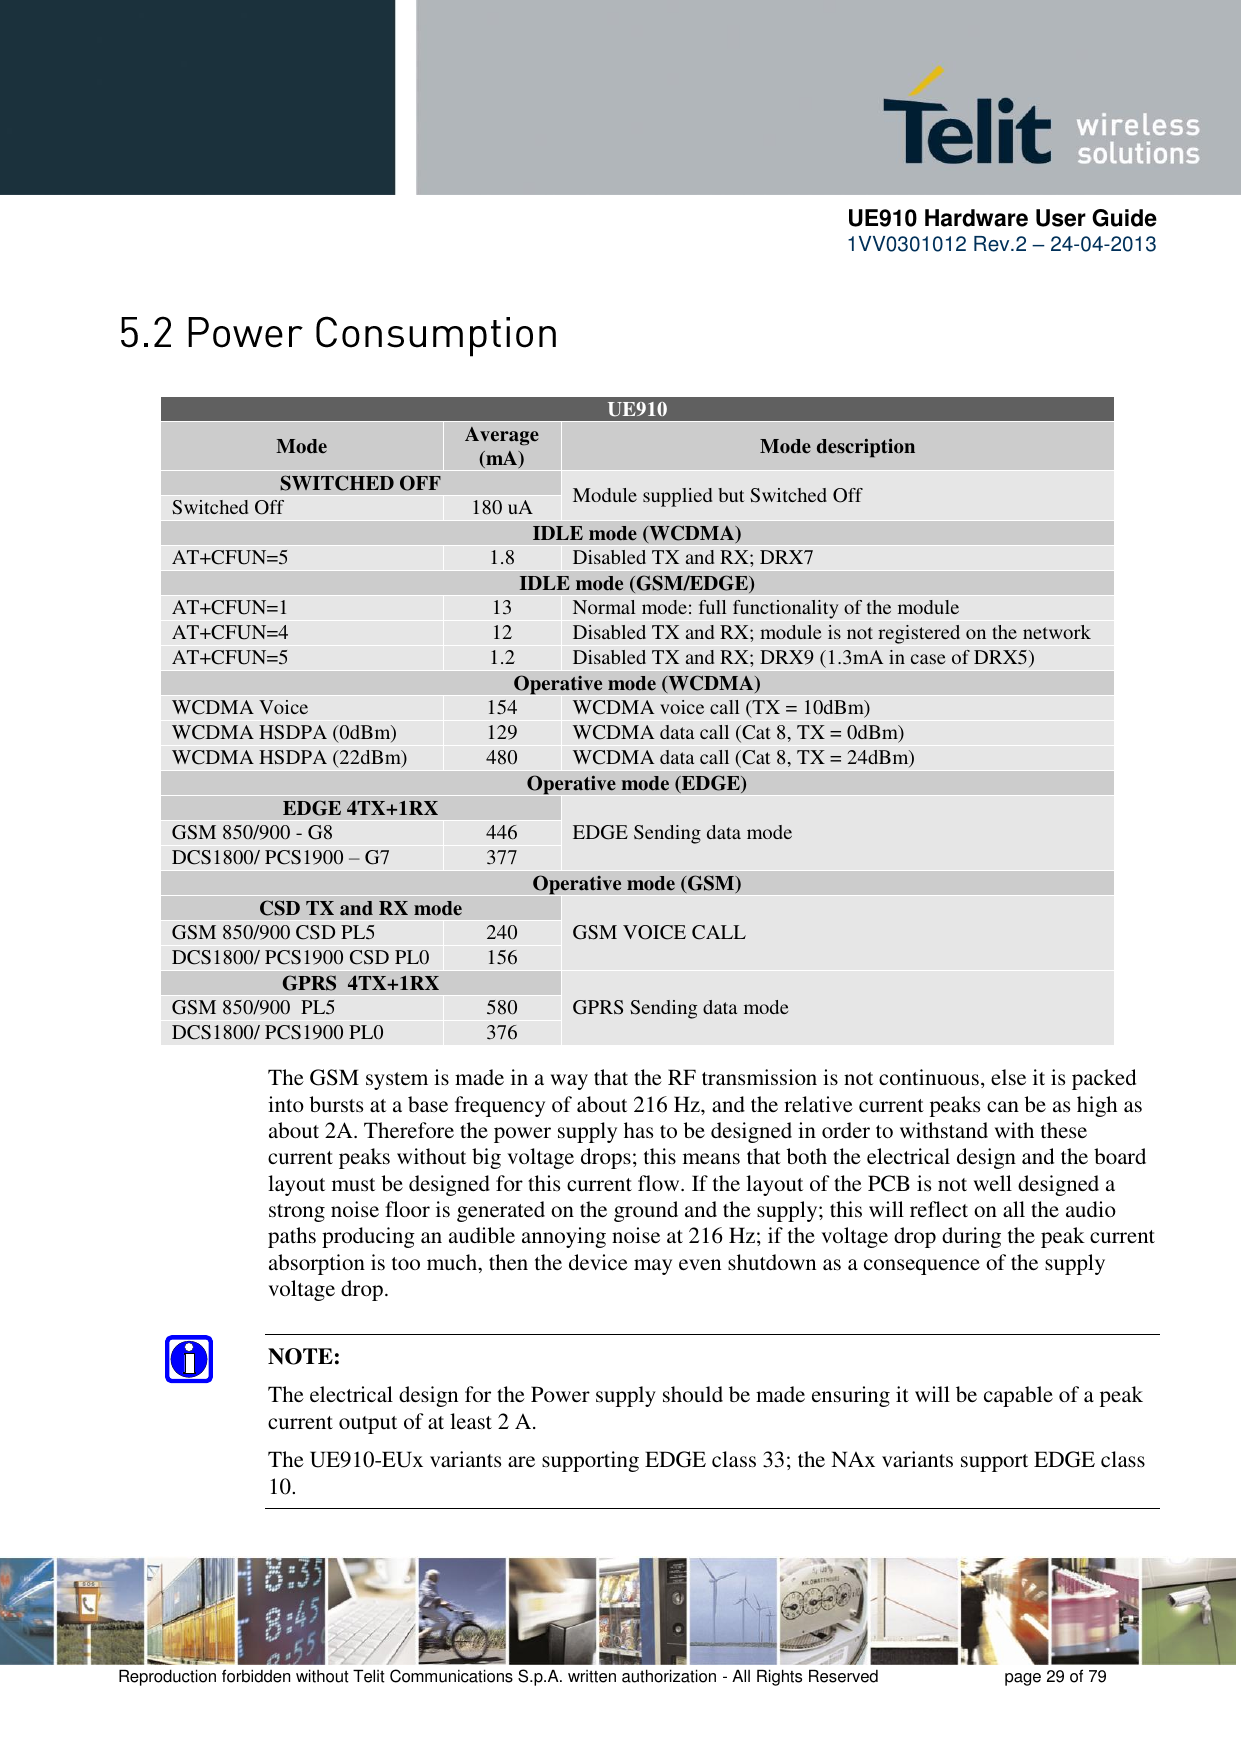      UE910 Hardware User Guide  1VV0301012 Rev.2 – 24-04-2013    Reproduction forbidden without Telit Communications S.p.A. written authorization - All Rights Reserved    page 29 of 79   UE910 Mode Average (mA) Mode description SWITCHED OFF Module supplied but Switched Off Switched Off 180 uA IDLE mode (WCDMA) AT+CFUN=5 1.8 Disabled TX and RX; DRX7 IDLE mode (GSM/EDGE) AT+CFUN=1  13 Normal mode: full functionality of the module  AT+CFUN=4 12 Disabled TX and RX; module is not registered on the network AT+CFUN=5 1.2 Disabled TX and RX; DRX9 (1.3mA in case of DRX5) Operative mode (WCDMA) WCDMA Voice 154 WCDMA voice call (TX = 10dBm) WCDMA HSDPA (0dBm) 129 WCDMA data call (Cat 8, TX = 0dBm) WCDMA HSDPA (22dBm) 480 WCDMA data call (Cat 8, TX = 24dBm) Operative mode (EDGE) EDGE 4TX+1RX EDGE Sending data mode GSM 850/900 - G8 446 DCS1800/ PCS1900 – G7 377 Operative mode (GSM) CSD TX and RX mode GSM VOICE CALL GSM 850/900 CSD PL5 240 DCS1800/ PCS1900 CSD PL0 156 GPRS  4TX+1RX GPRS Sending data mode GSM 850/900  PL5 580 DCS1800/ PCS1900 PL0 376  The GSM system is made in a way that the RF transmission is not continuous, else it is packed into bursts at a base frequency of about 216 Hz, and the relative current peaks can be as high as about 2A. Therefore the power supply has to be designed in order to withstand with these current peaks without big voltage drops; this means that both the electrical design and the board layout must be designed for this current flow. If the layout of the PCB is not well designed a strong noise floor is generated on the ground and the supply; this will reflect on all the audio paths producing an audible annoying noise at 216 Hz; if the voltage drop during the peak current absorption is too much, then the device may even shutdown as a consequence of the supply voltage drop.  NOTE: The electrical design for the Power supply should be made ensuring it will be capable of a peak current output of at least 2 A. The UE910-EUx variants are supporting EDGE class 33; the NAx variants support EDGE class 10.  